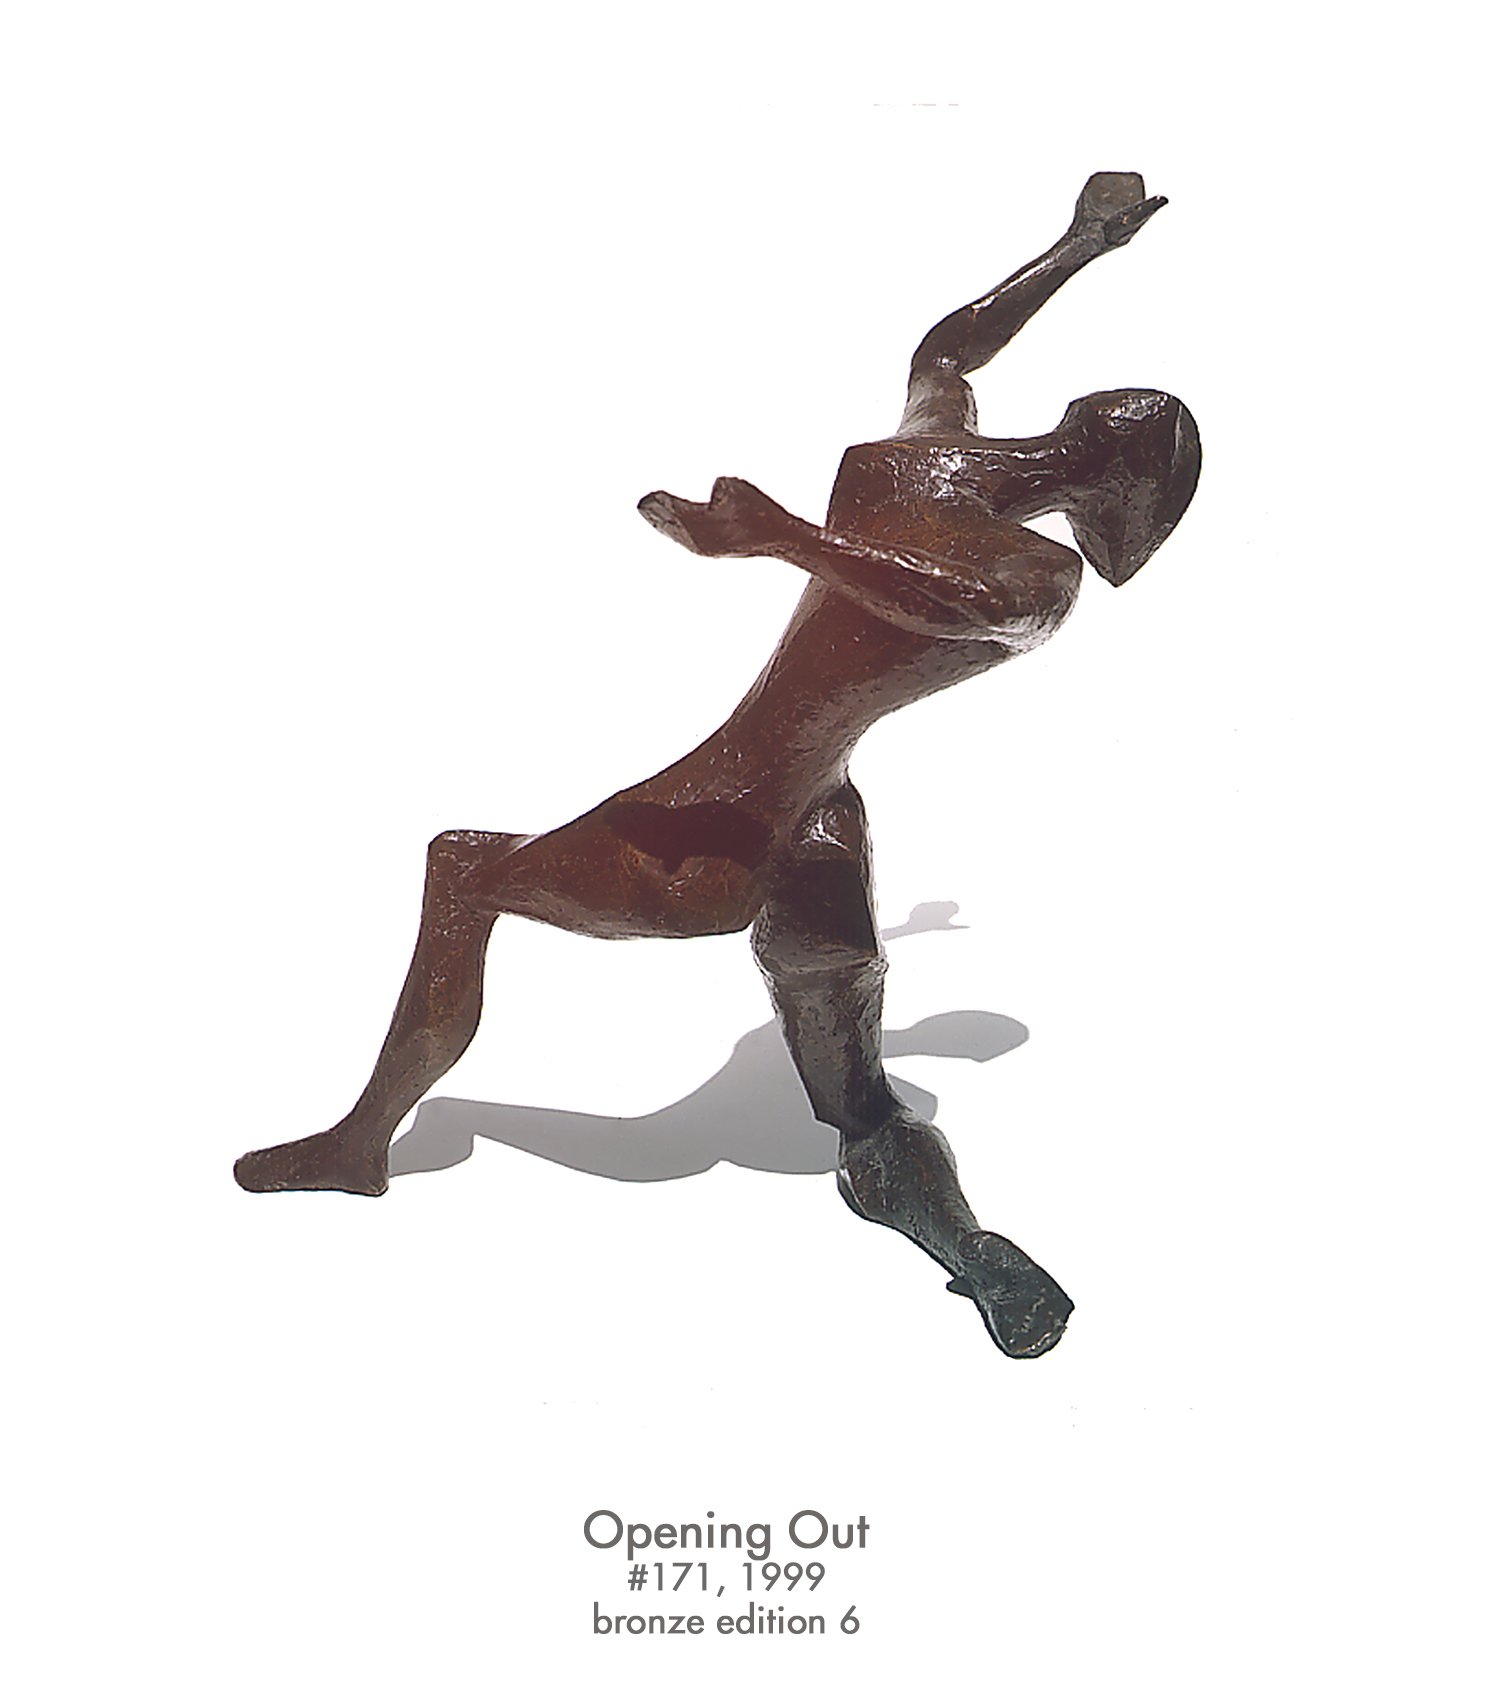 Opening Out, 1999, bronze, #171